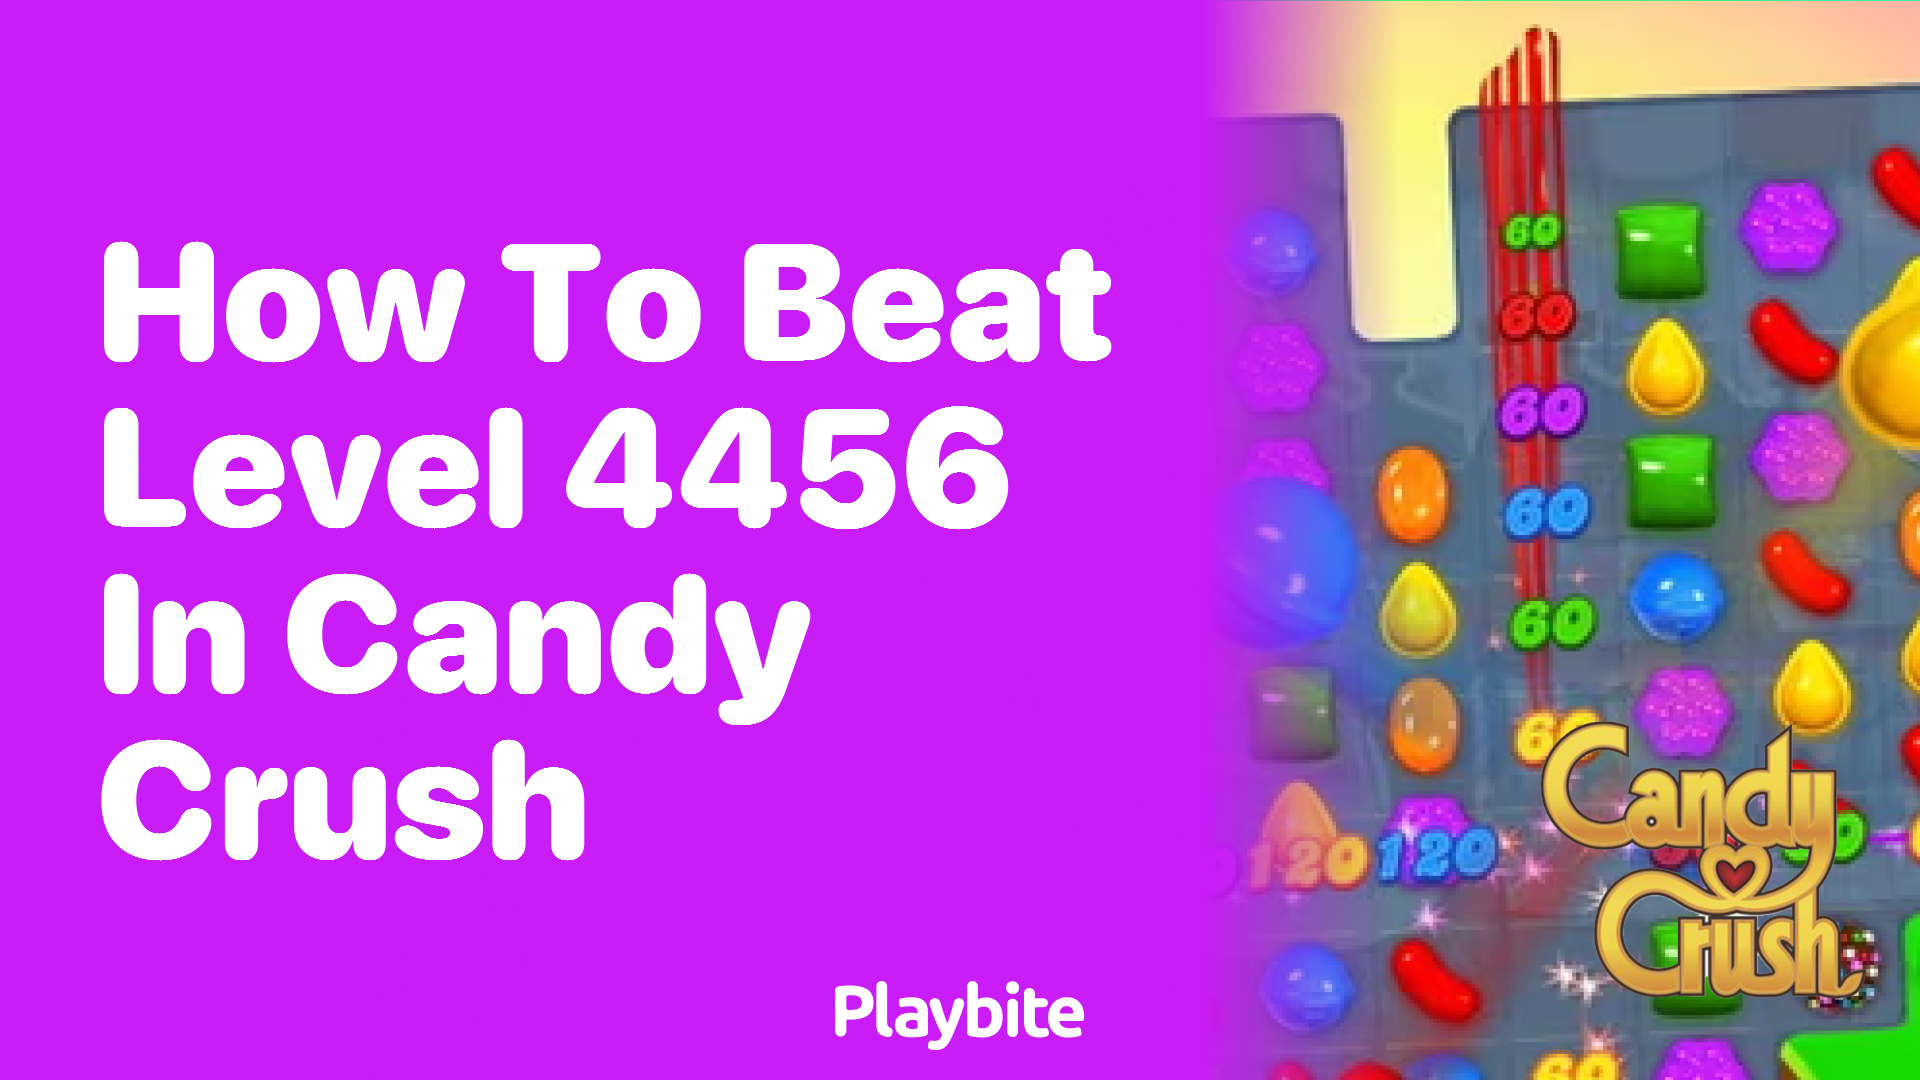 How to Crush Level 4456 in Candy Crush!